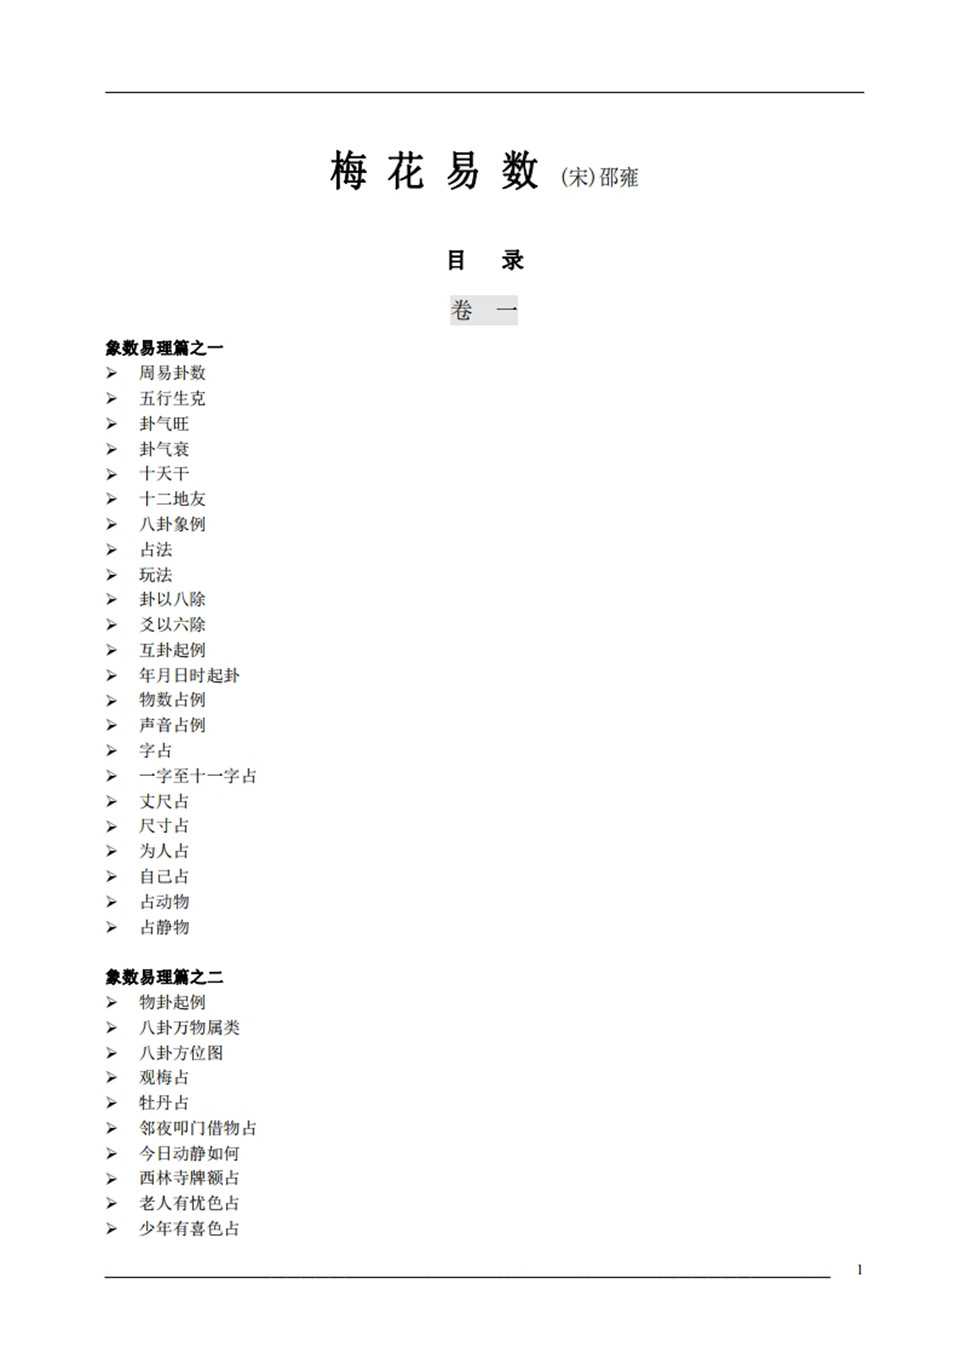 Plum Blossom and Easy Numbers (Song) Shao Yong.pdf